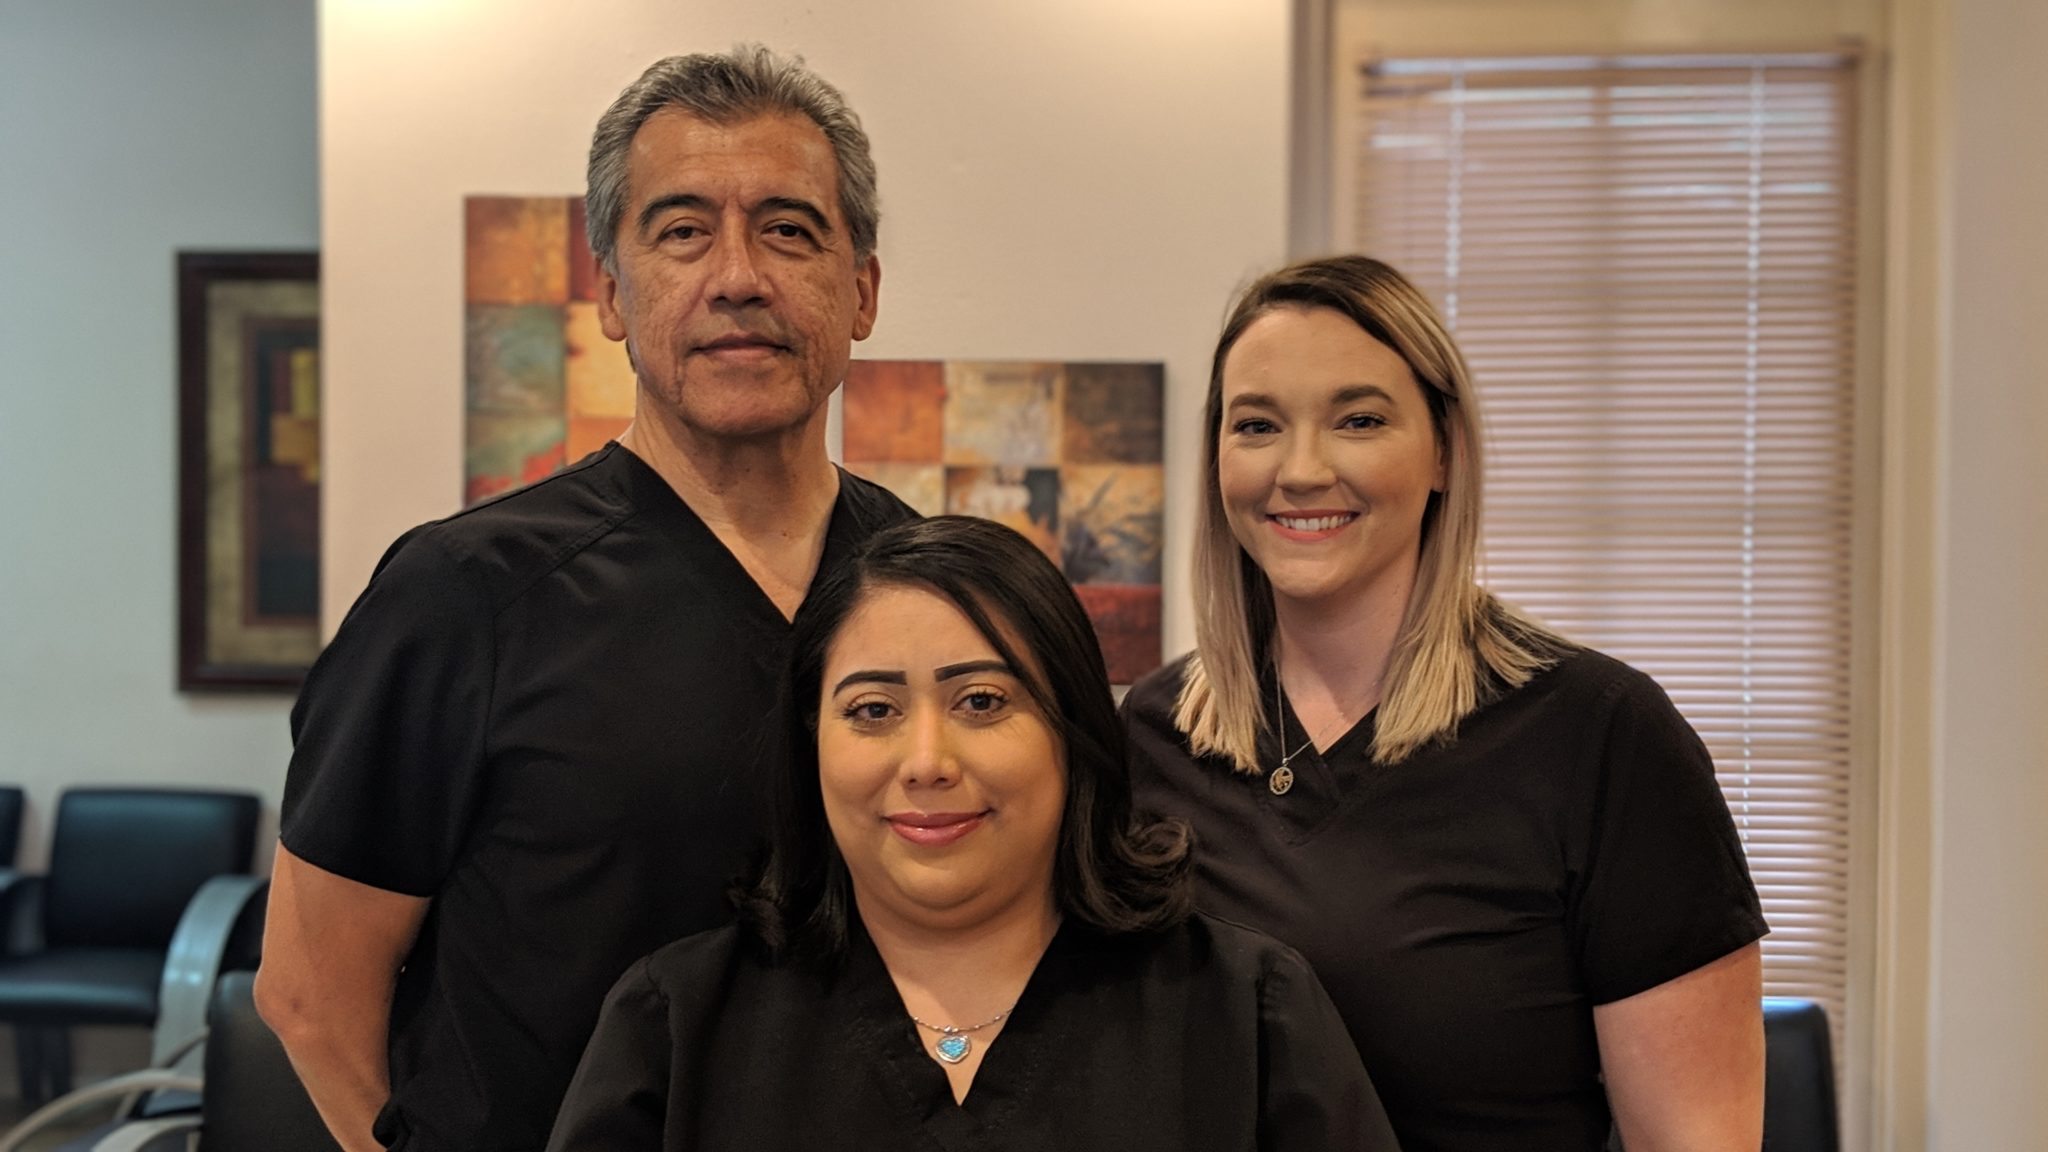 Dr Manuel Herrera Gynecologist and his staff